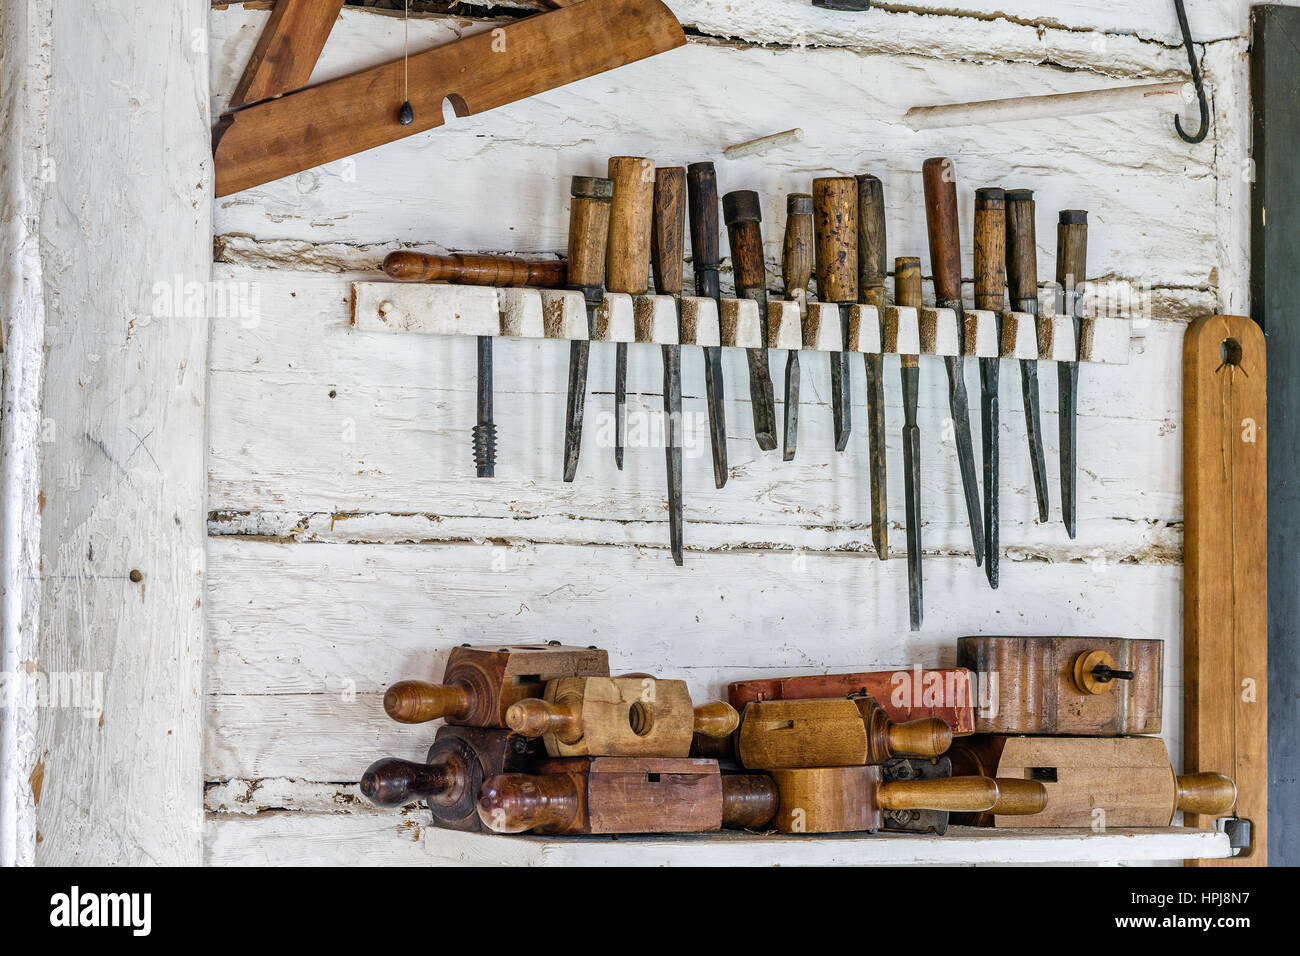 Vintage carpentry tools hanging on wall. Stock Photo